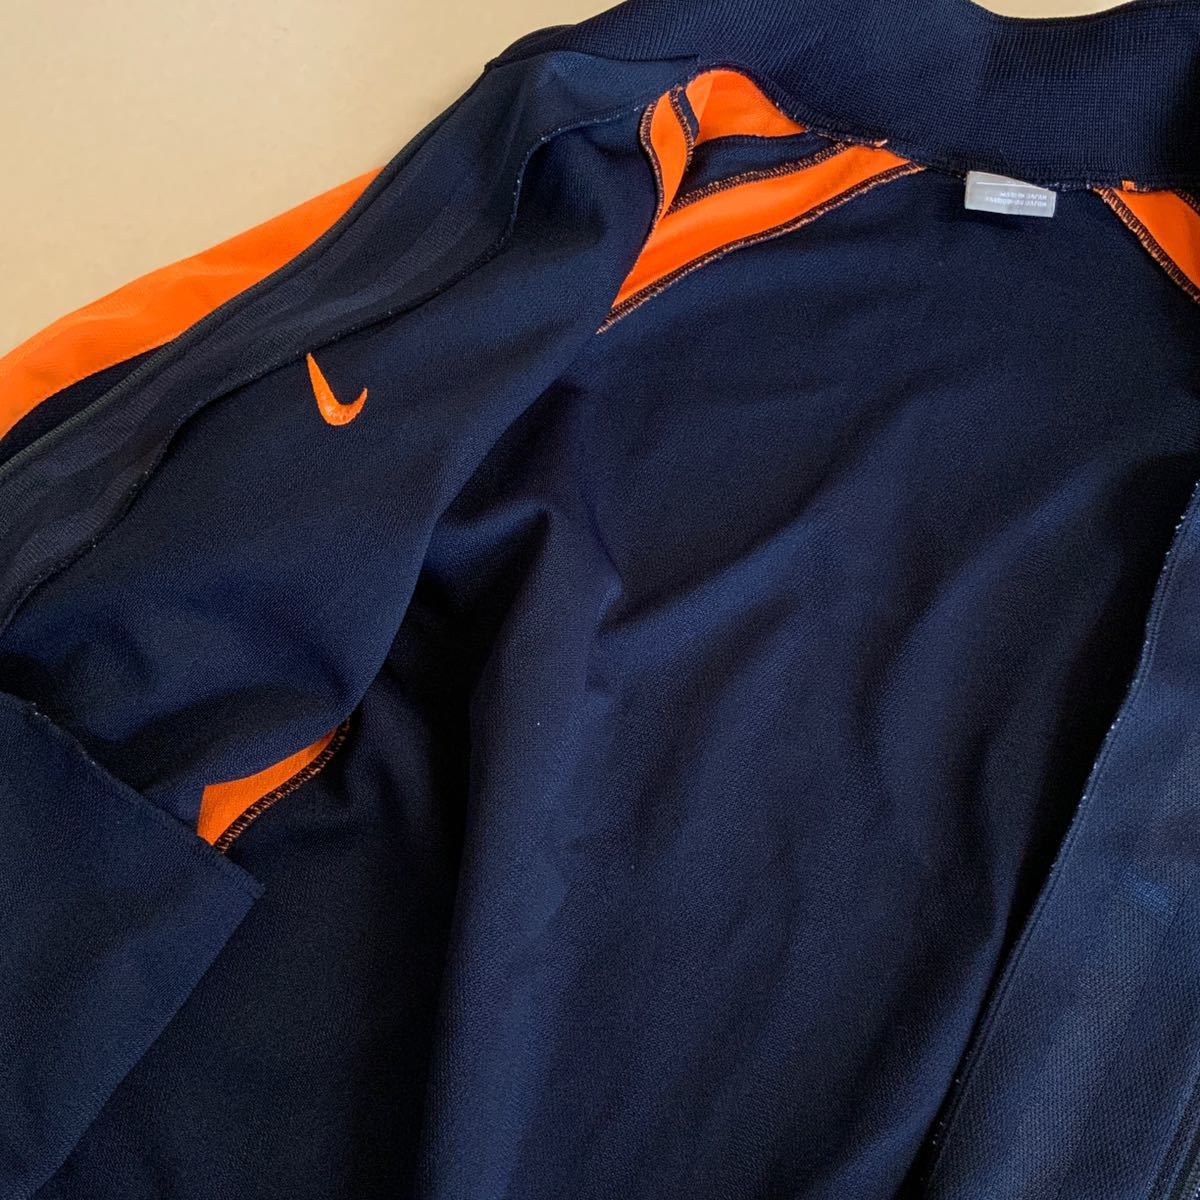  rare hard-to-find not for sale superior article NIKE Nike Saitama . high school soccer part jersey truck top men's XL size navy orange 